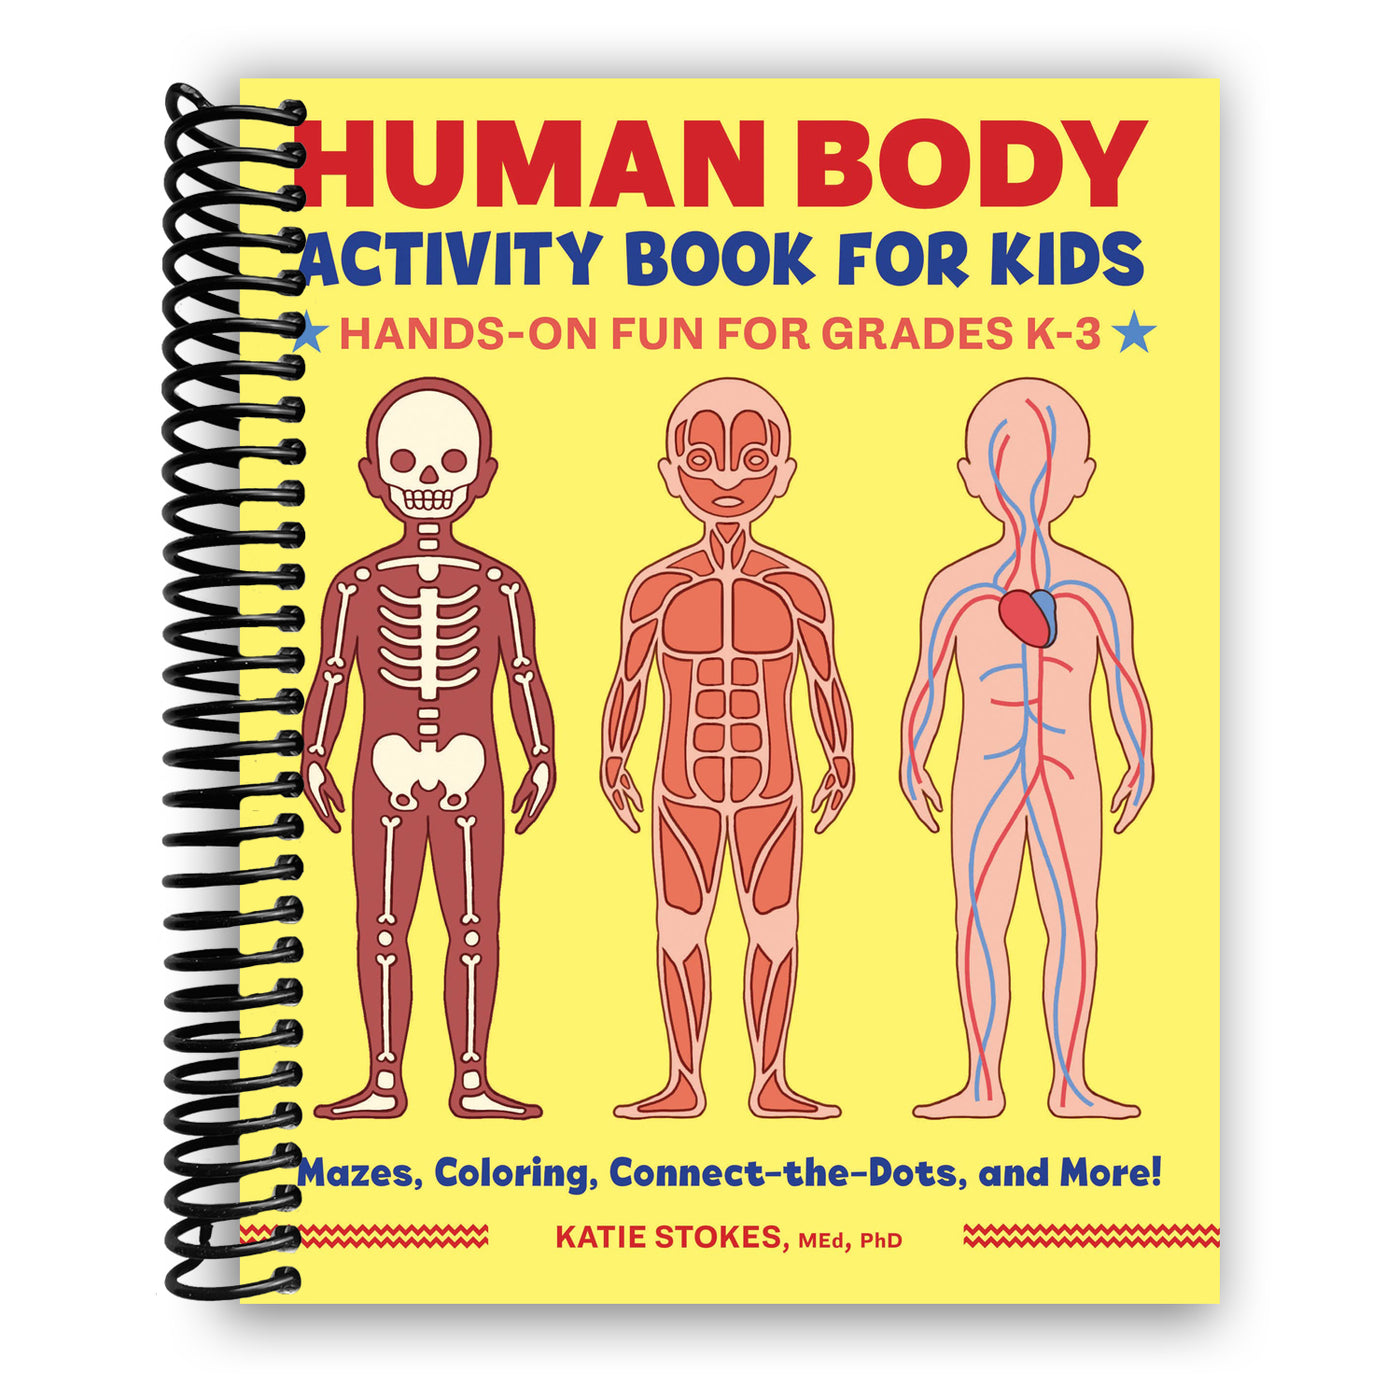 Human Body Activity Book for Kids: Hands-On Fun for Grades K-3 (Spiral Bound)